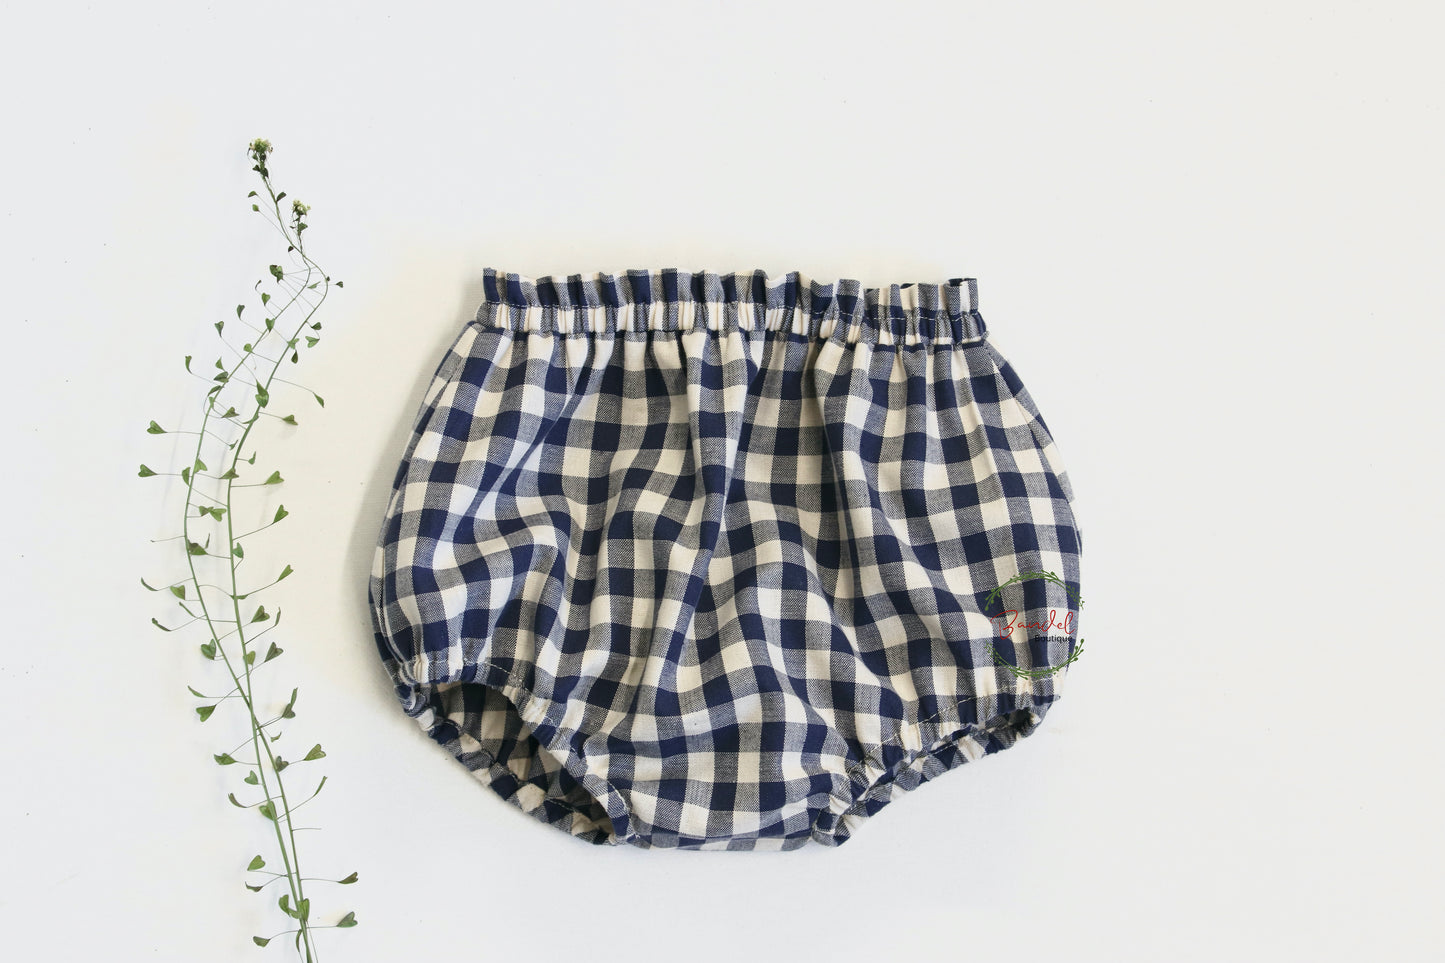 Navy Blue Cotton Bloomers are designed to keep baby and toddlers comfortable. Crafted from 100% cotton, the navy blue check pattern bloomer provides a stylish, yet comfortable fit. An ideal addition to your little one's wardrobe. Designed with frills detail at the waist and elastic waistband and leg cuffs to ensure a perfect fit for your baby or toddler.